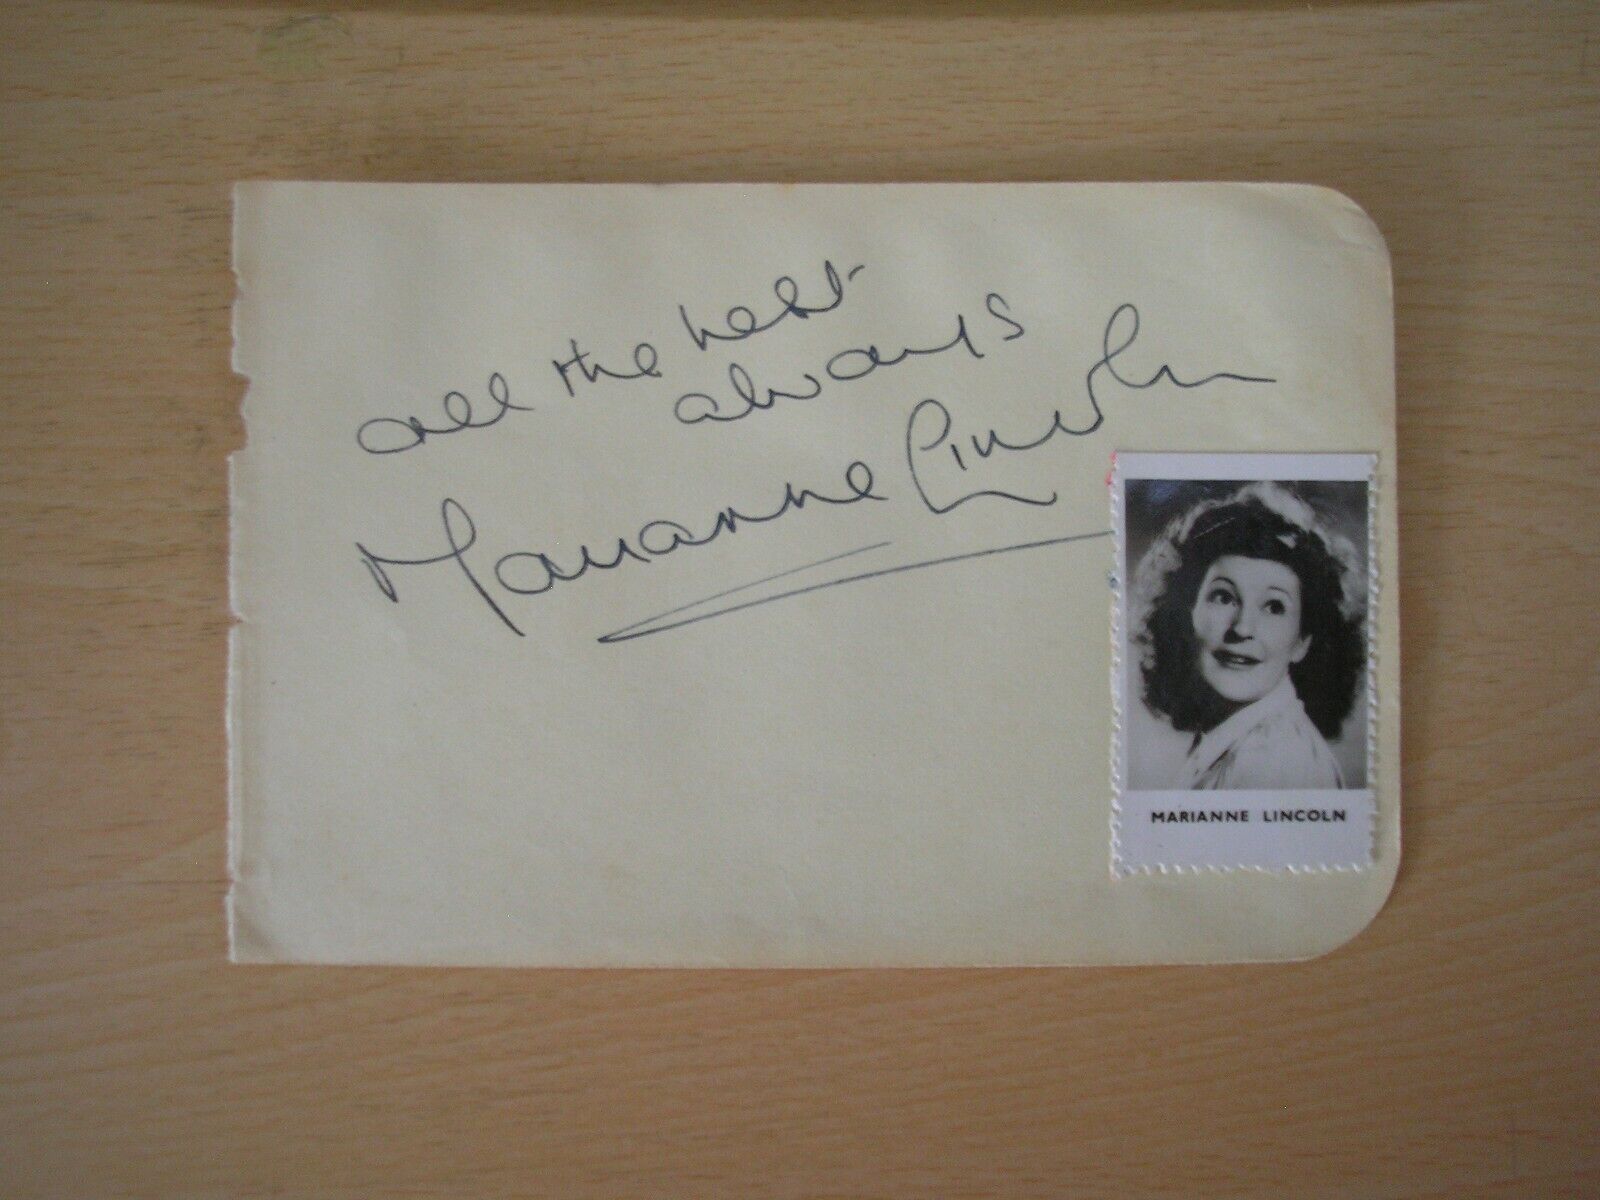 MARIANNE LINCOLN - ORIGINAL HAND-SIGNED ALBUM PAGE 1949 WITH SMALL PHOTO